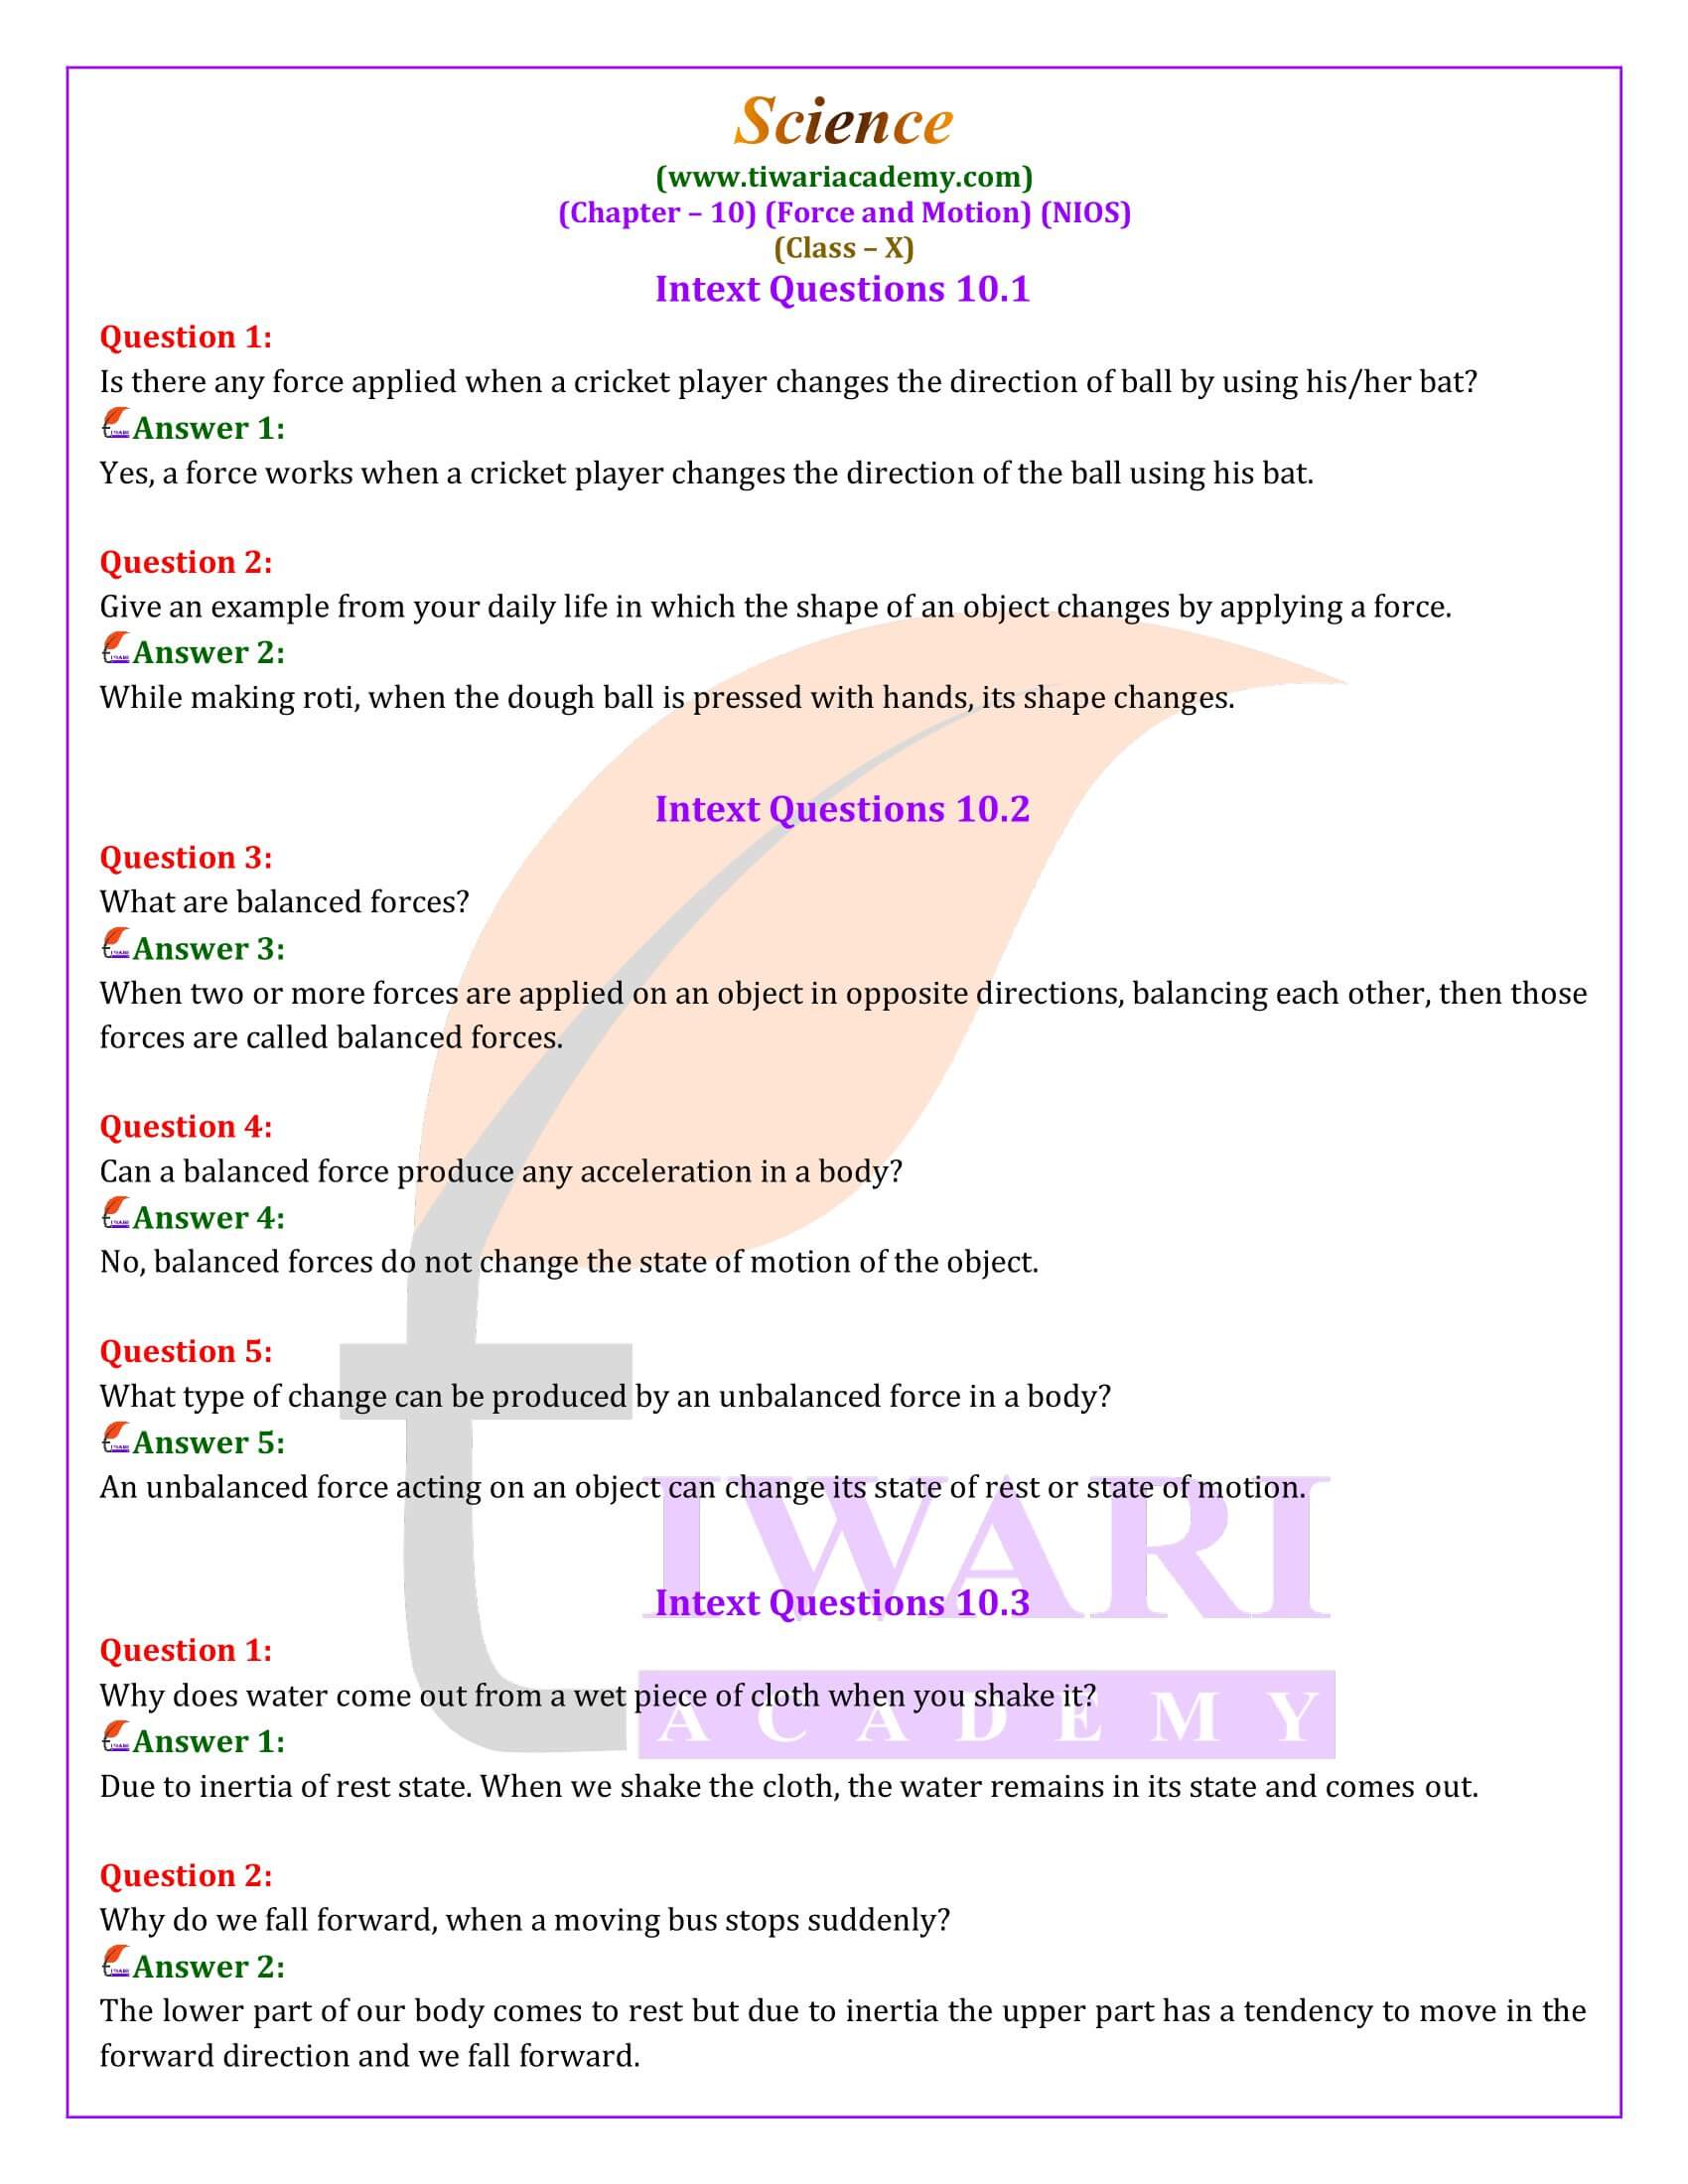 NIOS Class 10 Science Chapter 10 Force and Motion Solutions